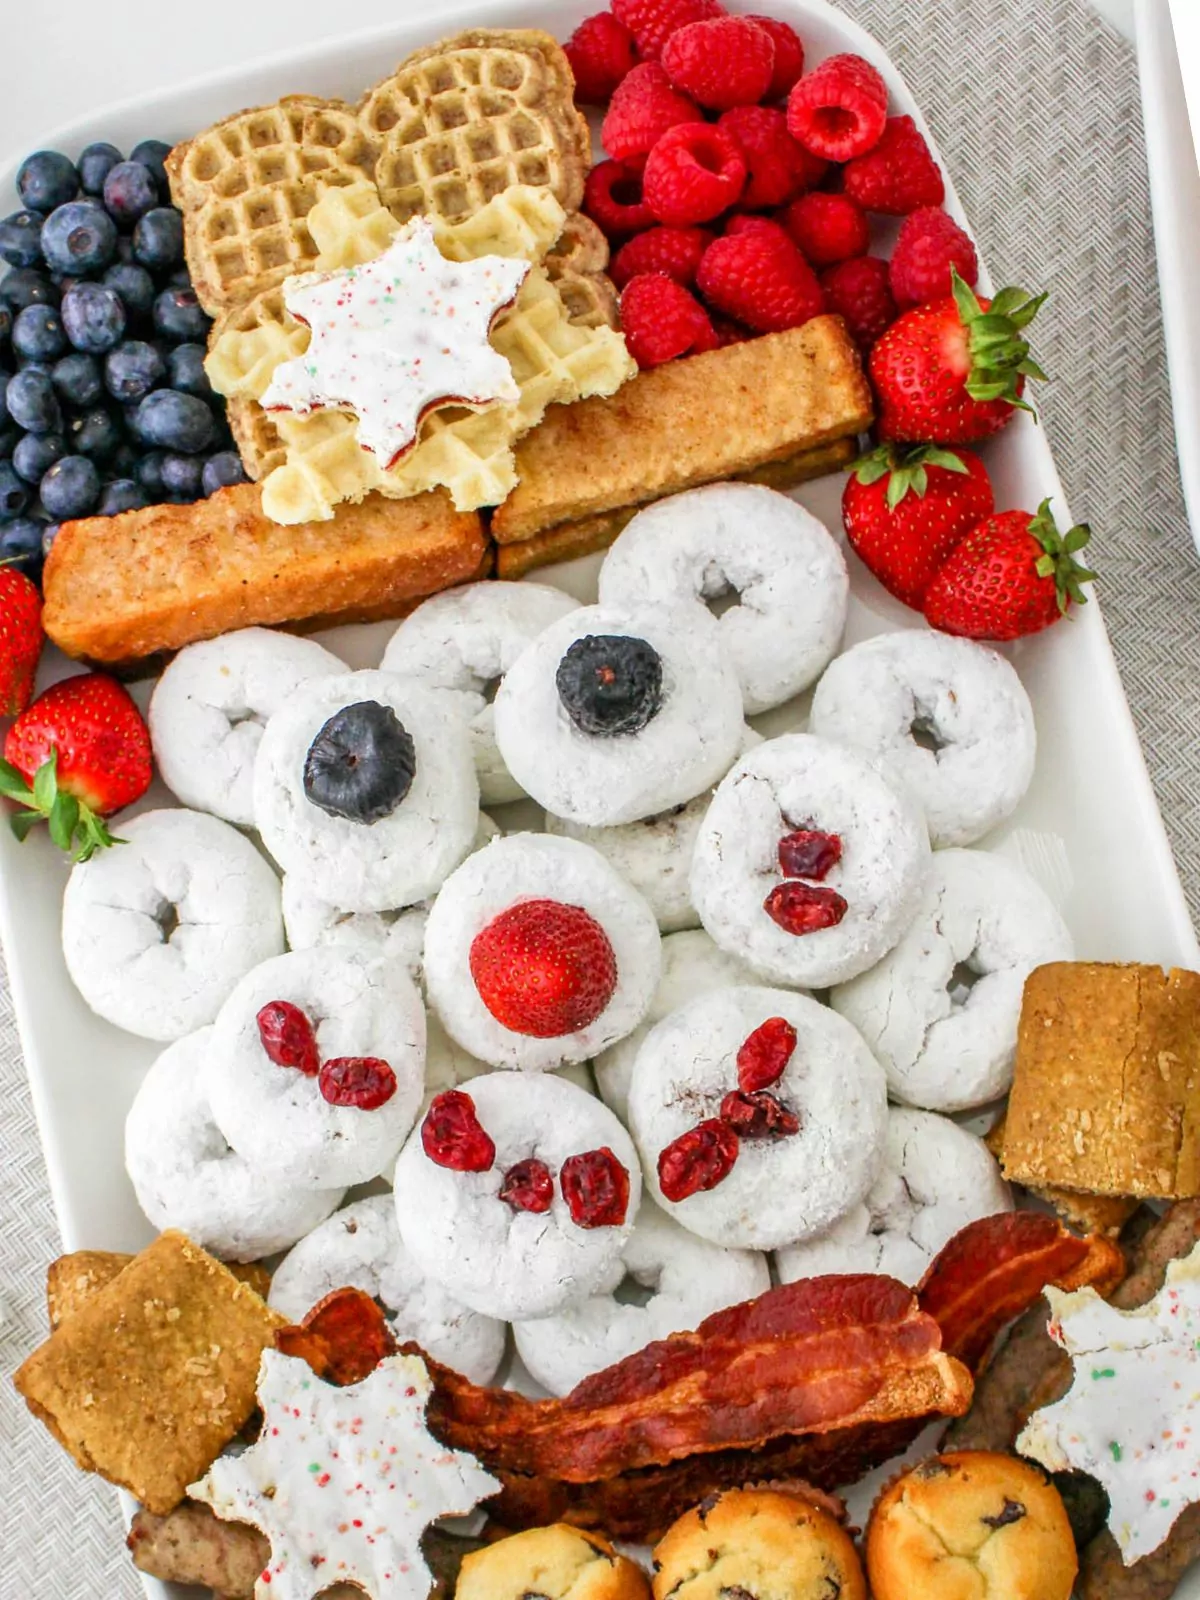 Snowman board with muffins, fruit, donuts, bacon.